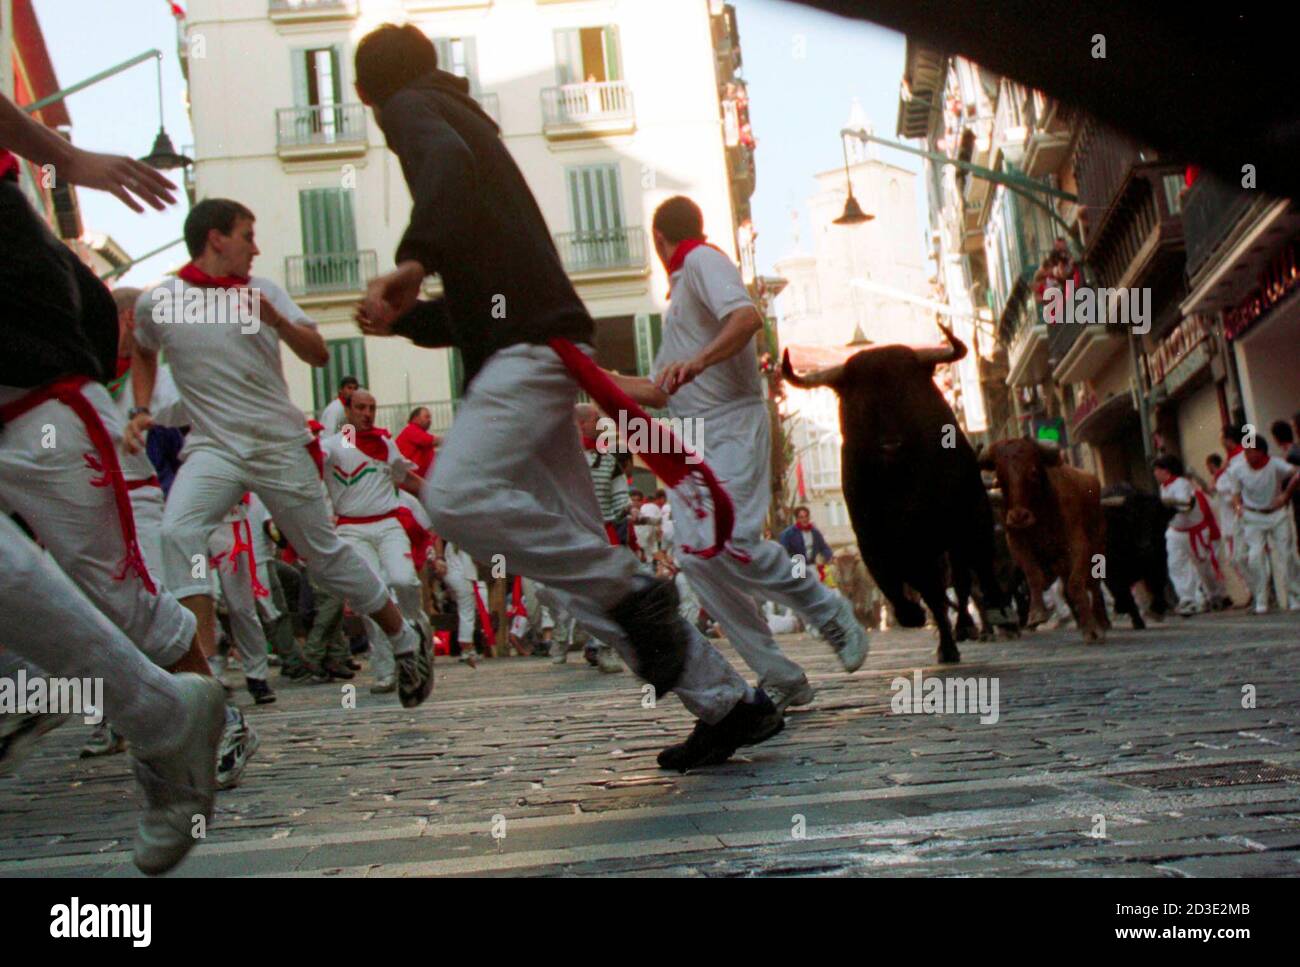 A group of runners lead a pack of fighting bulls from the Marques de Domecq ranch into a sharp corner turn in the 900-meter 'encierro', or running the bulls, through the old city streets of Pamplona, Spain during the July 12, 2001 morning event. Six fighting bulls stampede through the streets each morning in the week-long Fiesta de San Fermin which was brought to the world's attention in the mid-1920s by the American novelist Ernest Hemingway. The bulls are then fought and killed in a bullfight later the same day.  JWH Stock Photo